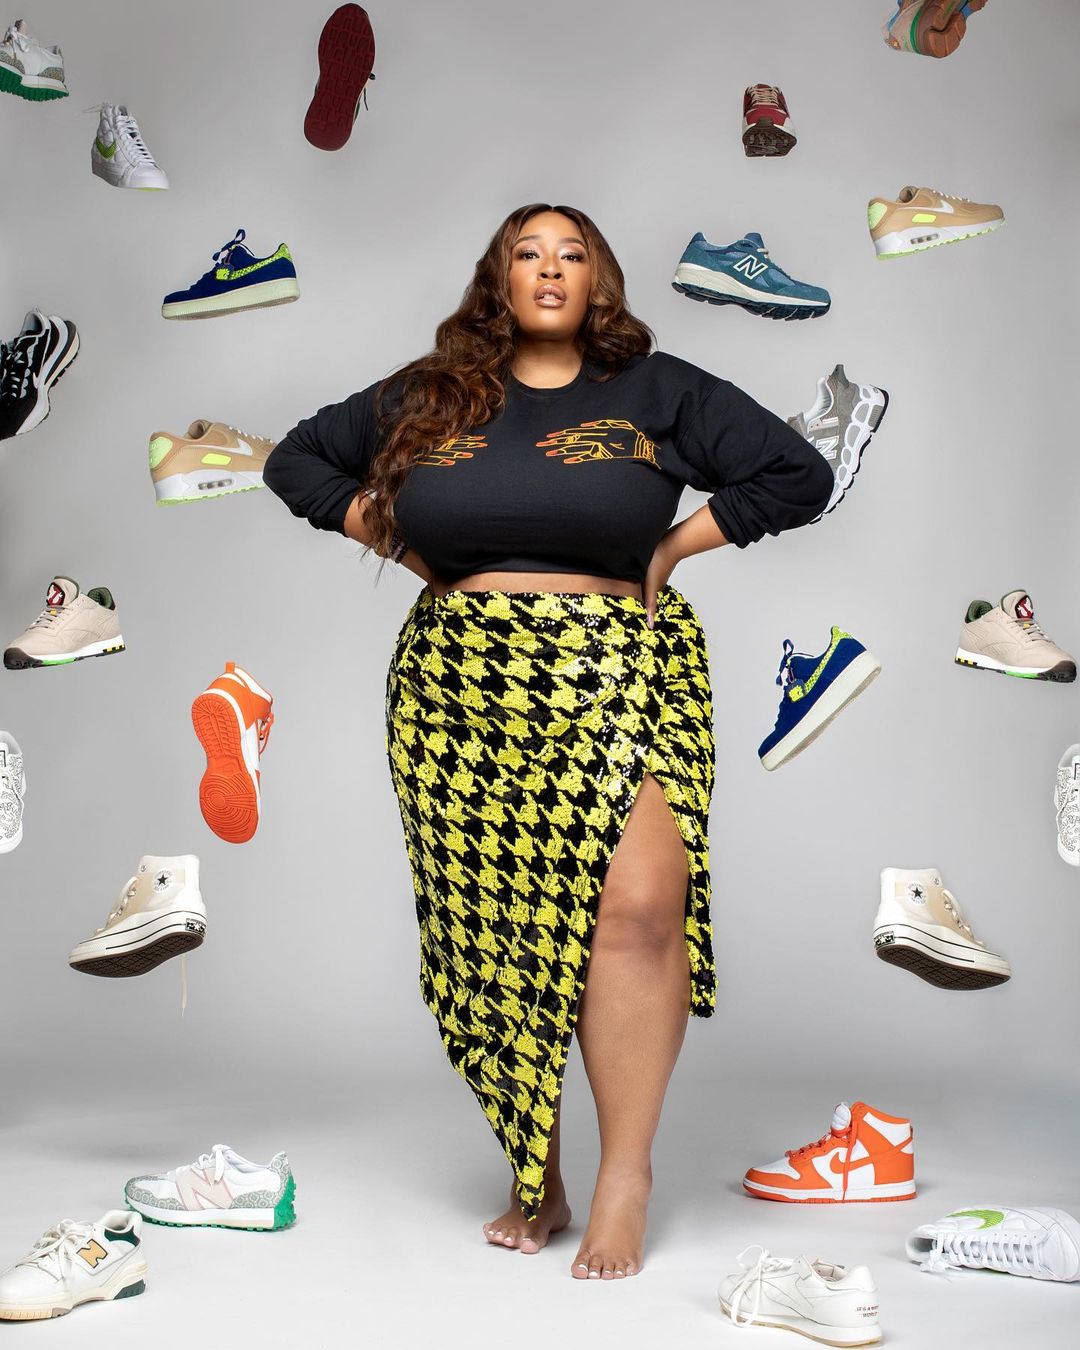 plus size influencers on Instagram